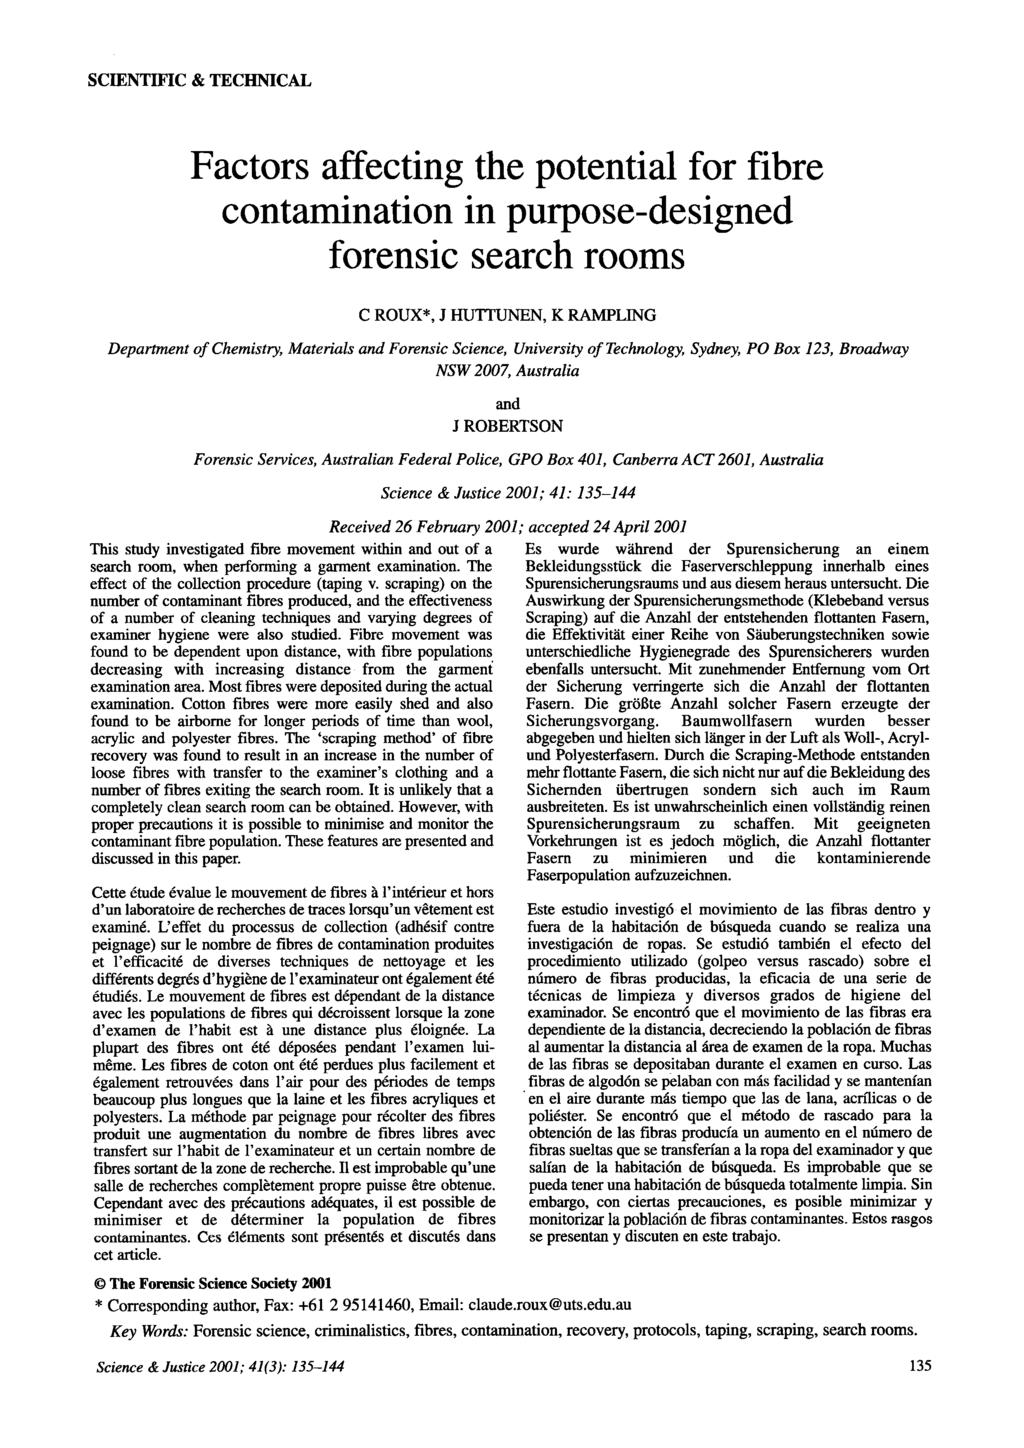 SCENTFC & TECHNCAL Factrs affecting the ptential fr fibre cntaminatin in purpse-designed frensic search rms C ROUX*, J HUTUNEN, K RAMPLNG Department f Chemistry, Materials and Frensic Science,